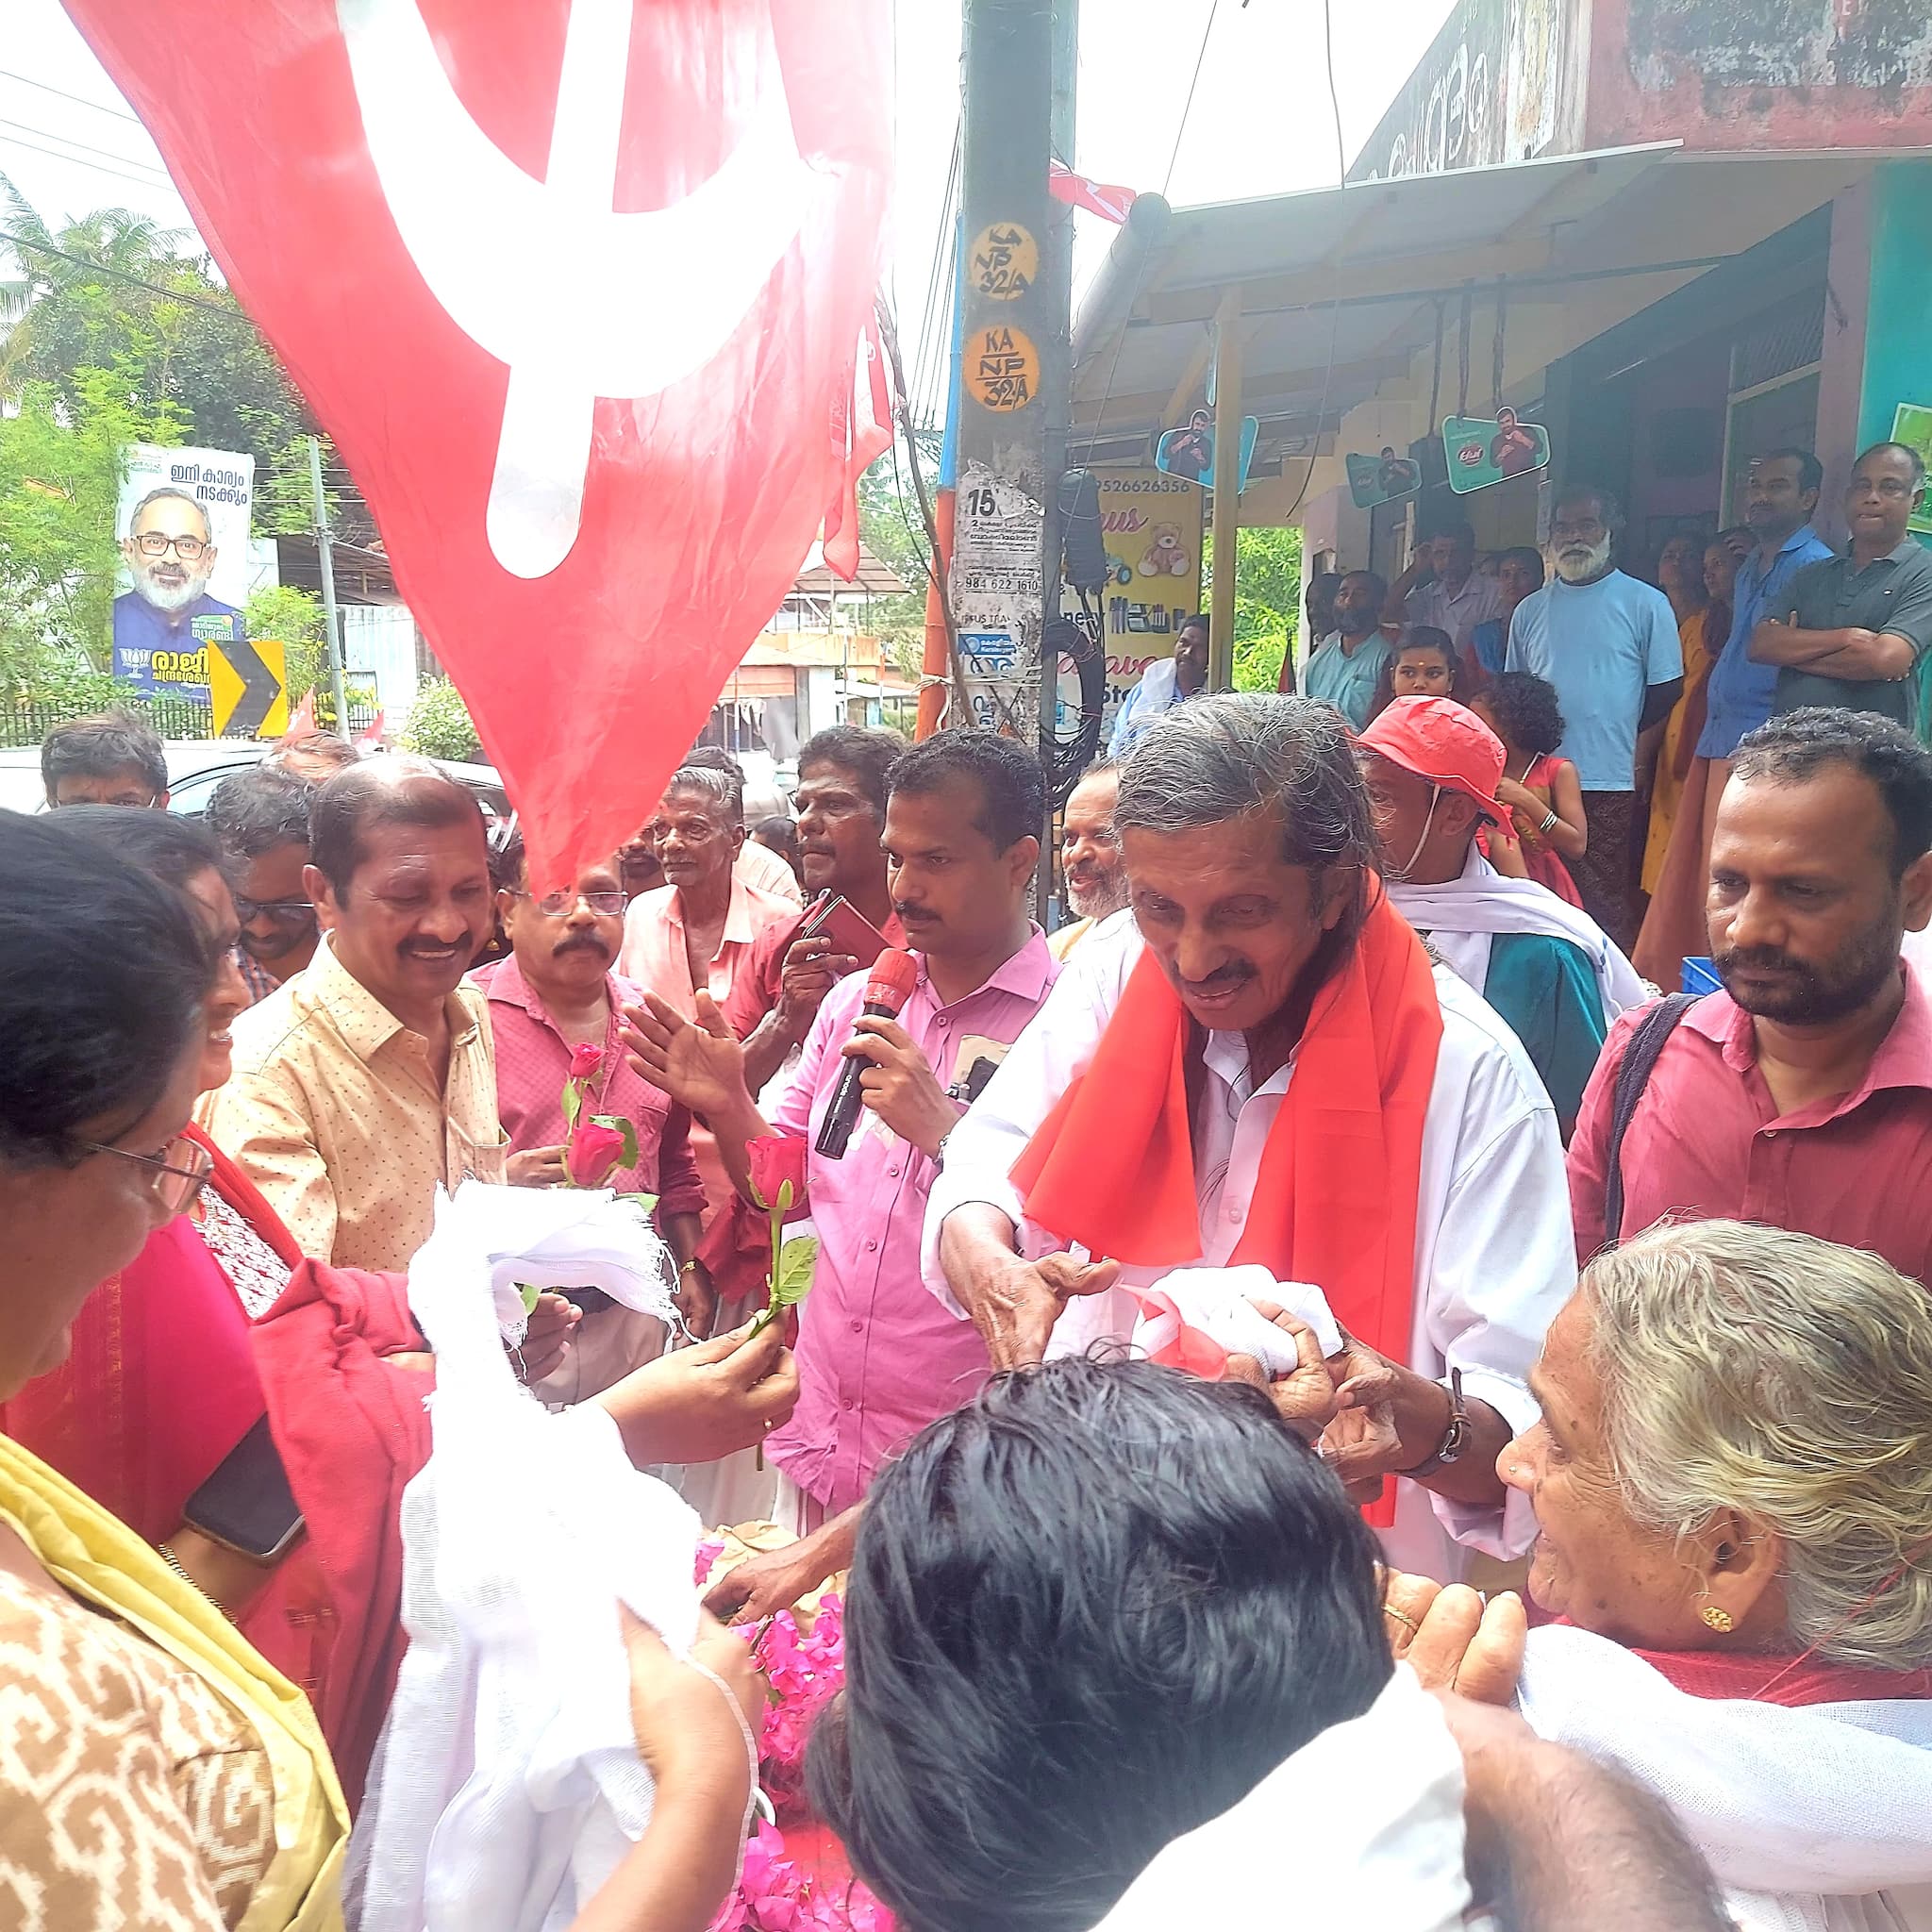 pannian ravindran: thiruvananthapuram's left candidate who's lived in party office for 40 years